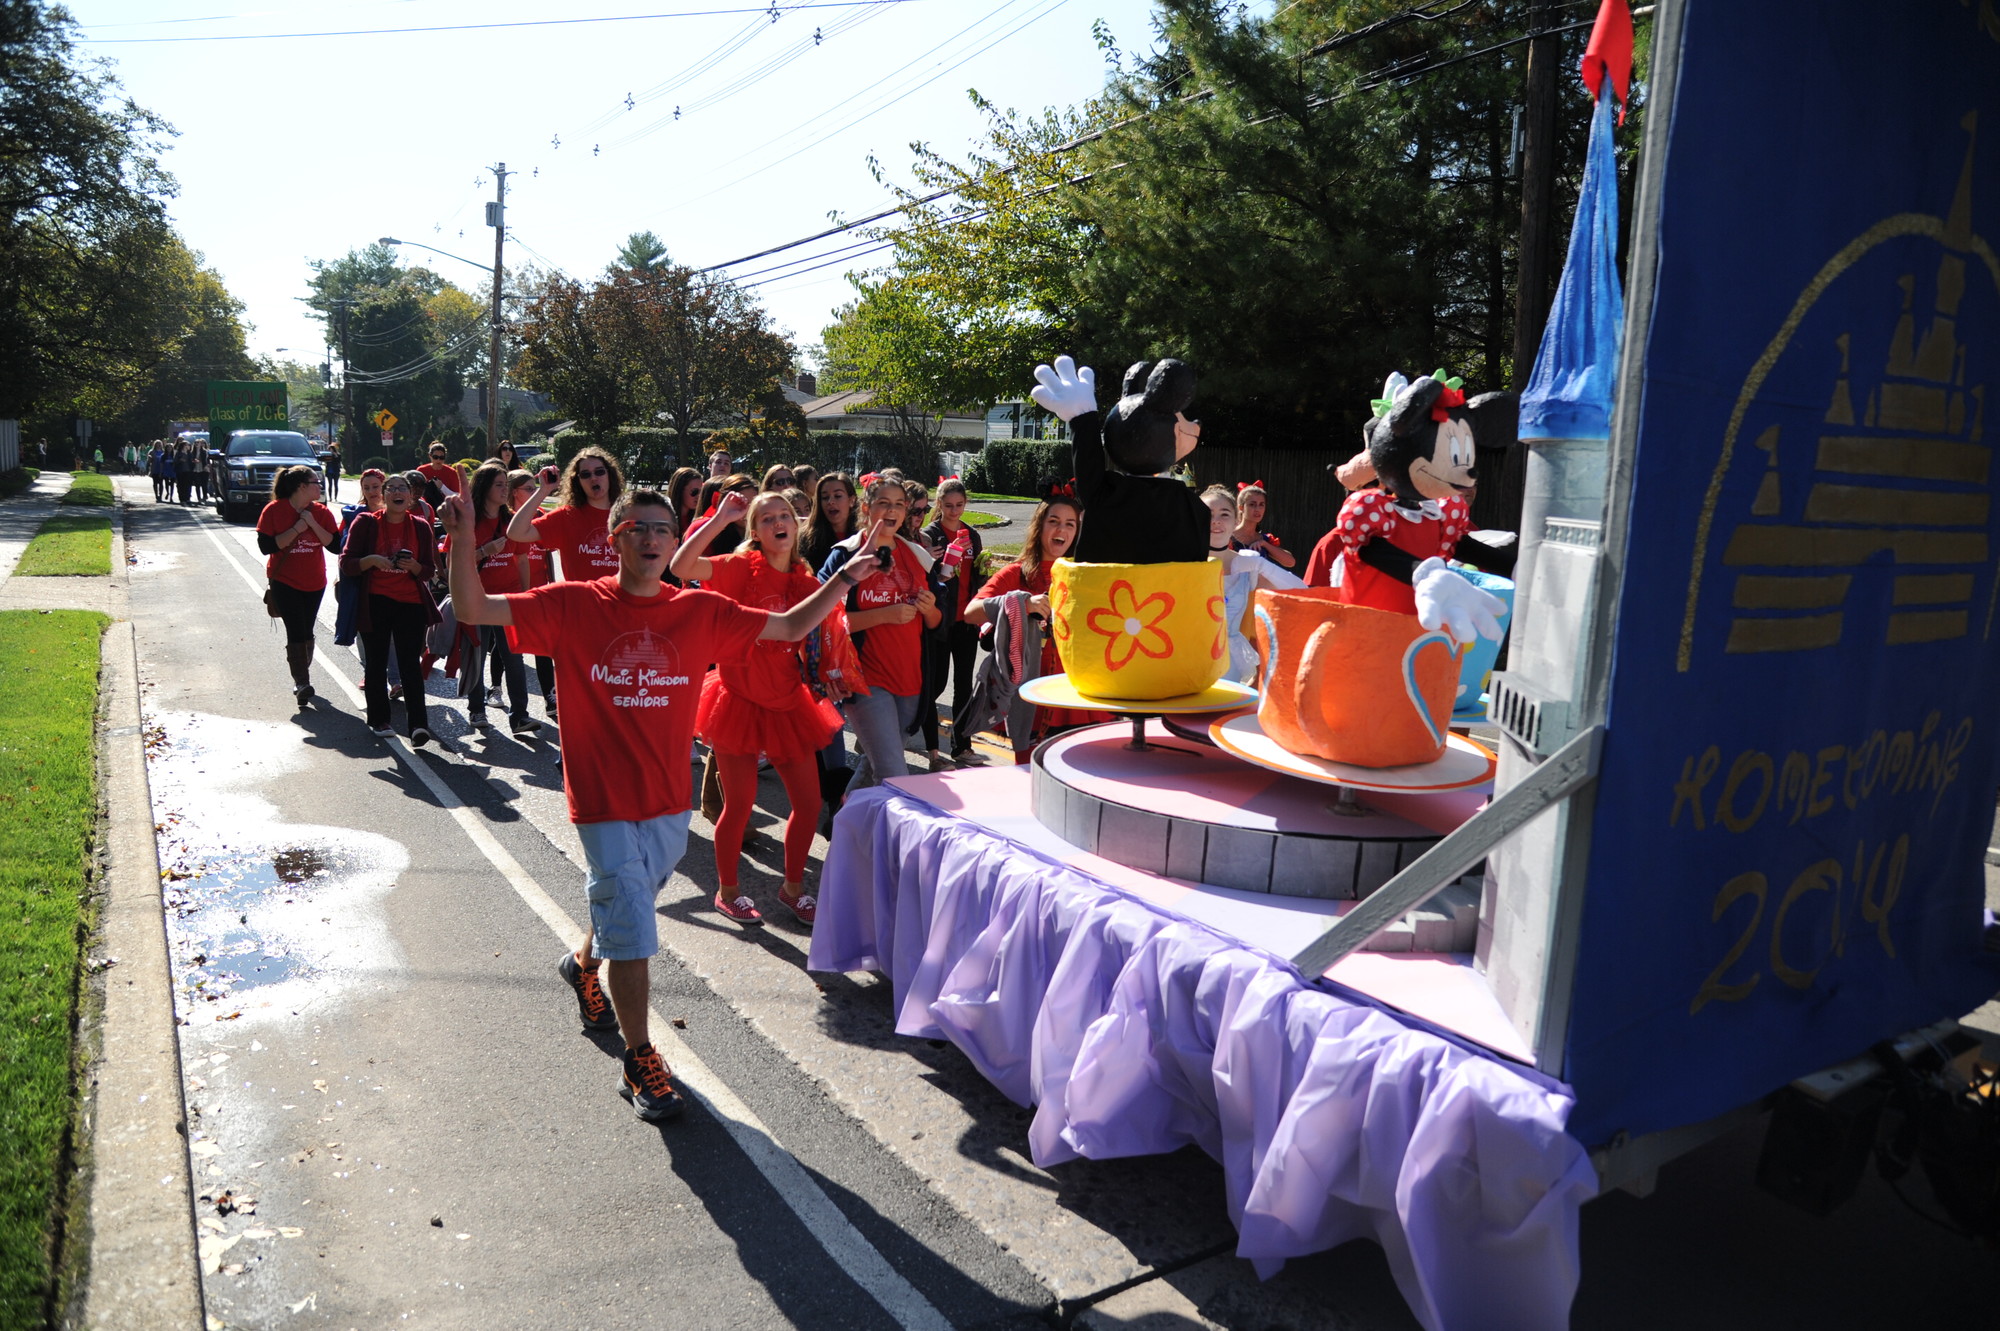 South Side High School seniors marched behind their Disney World float during the Homecoming parade.